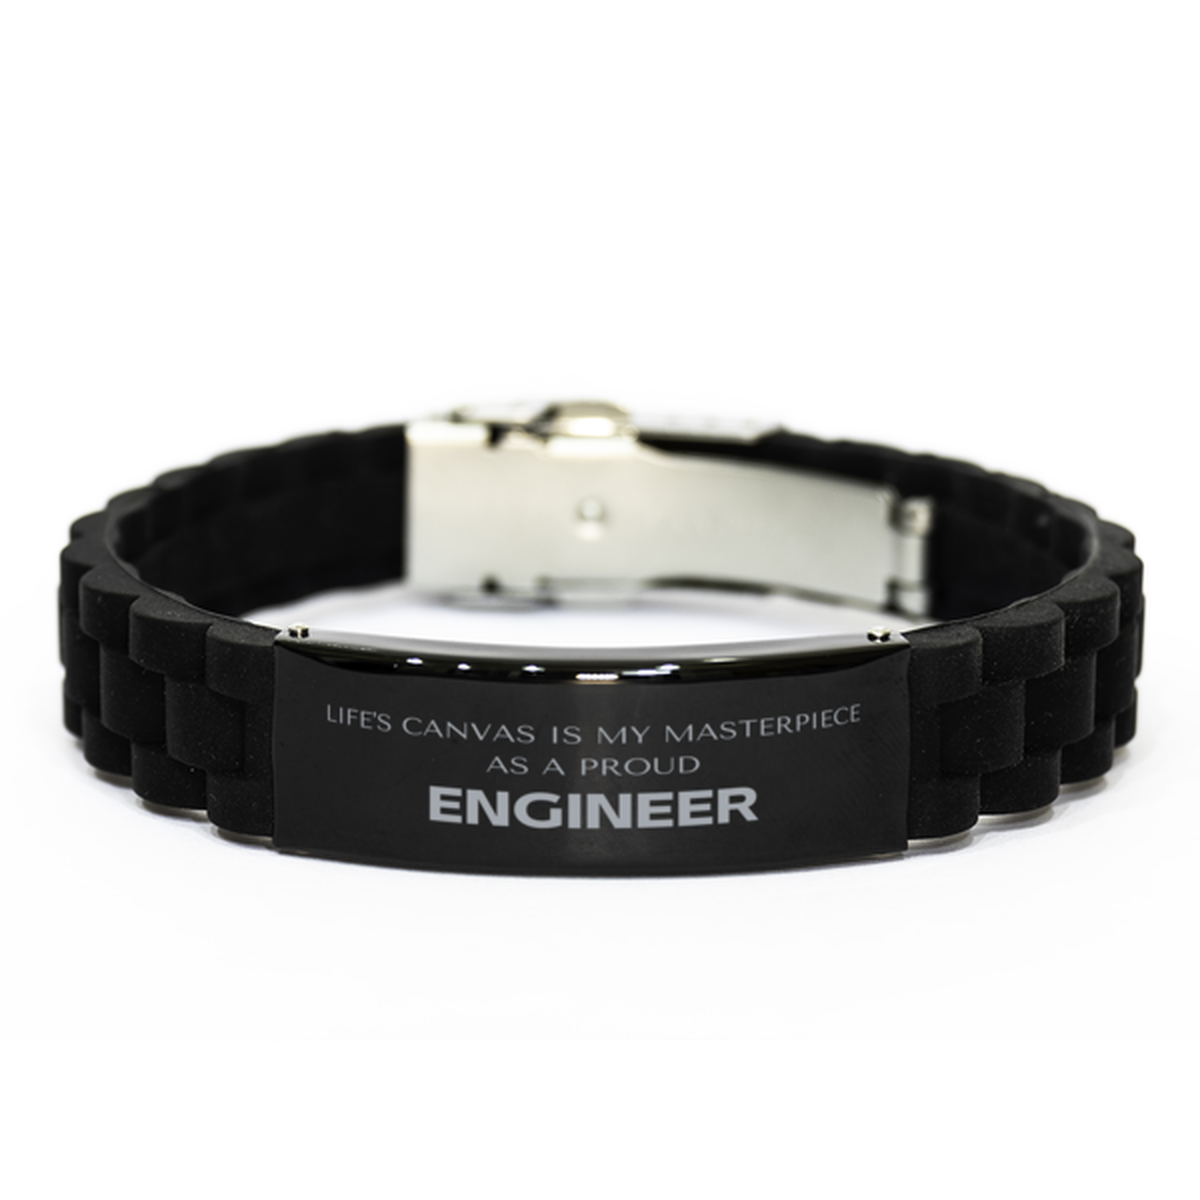 Proud Engineer Gifts, Life's canvas is my masterpiece, Epic Birthday Christmas Unique Black Glidelock Clasp Bracelet For Engineer, Coworkers, Men, Women, Friends